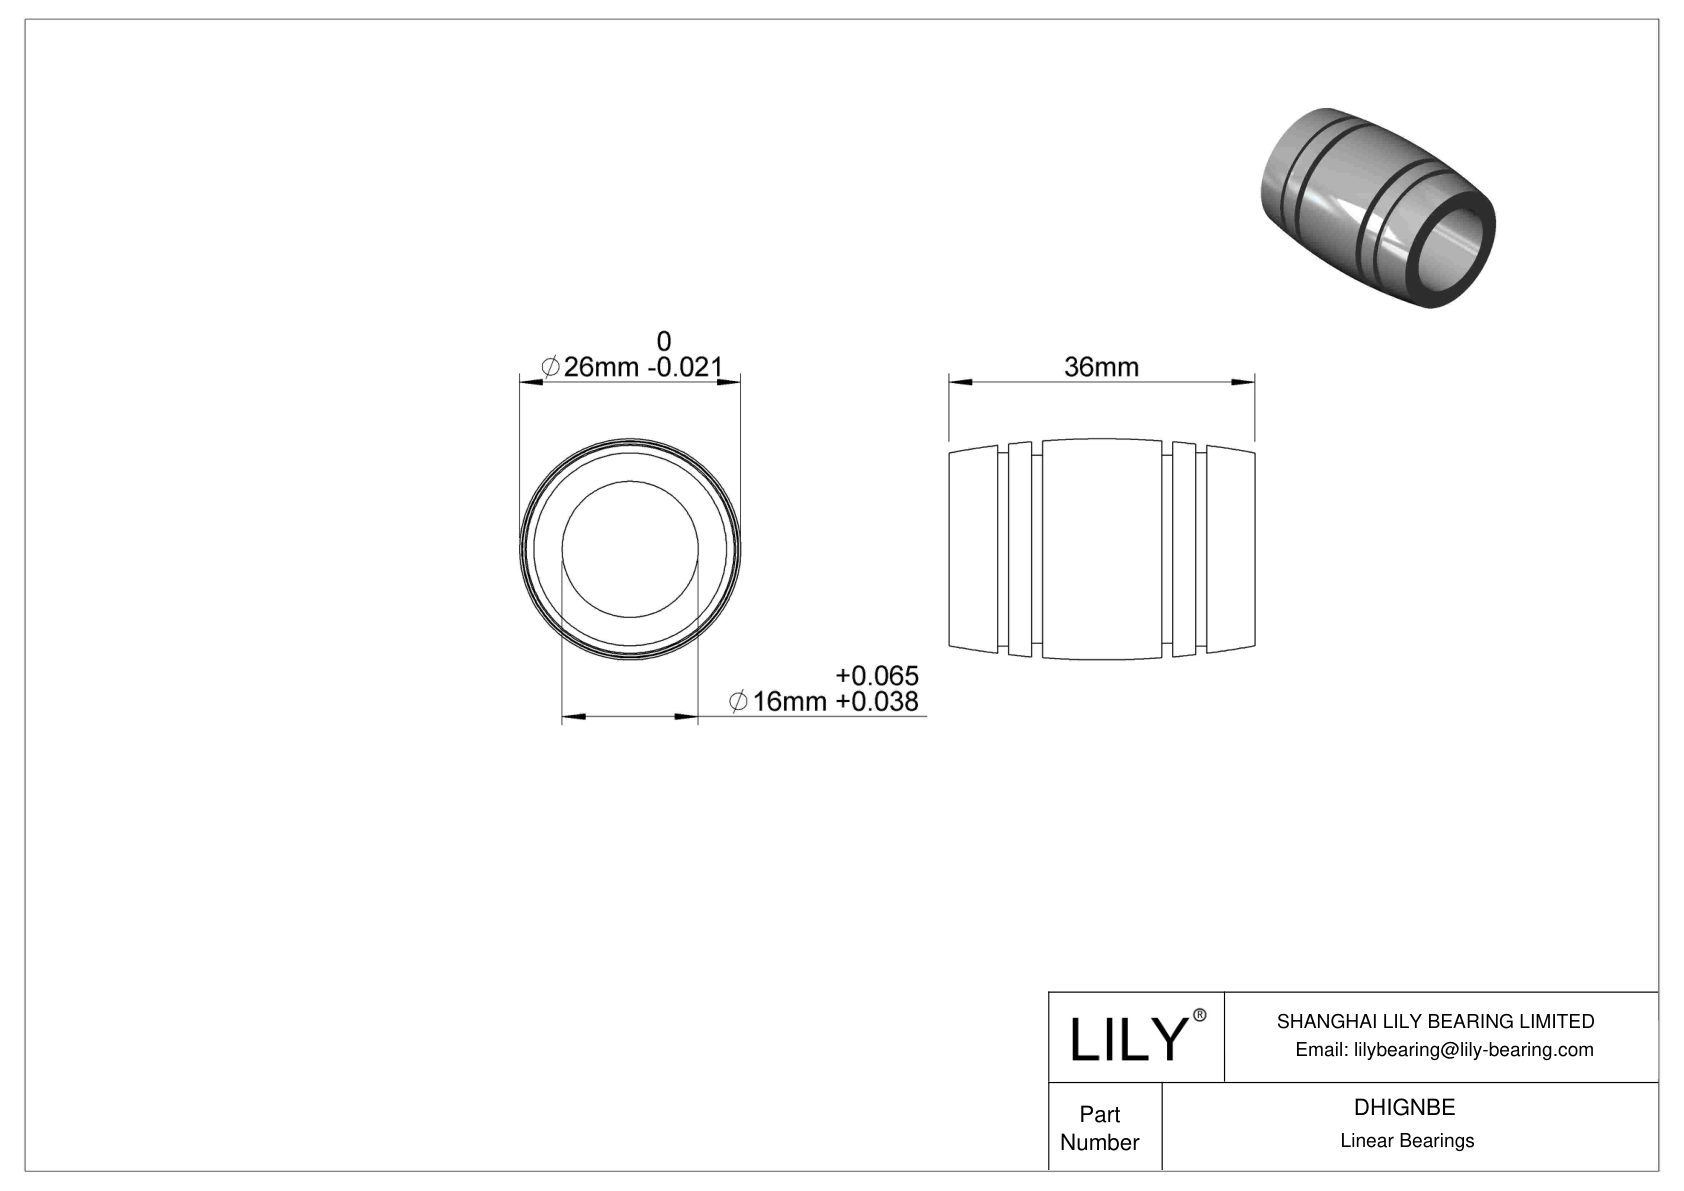 DHIGNBE Common Linear Sleeve Bearings cad drawing